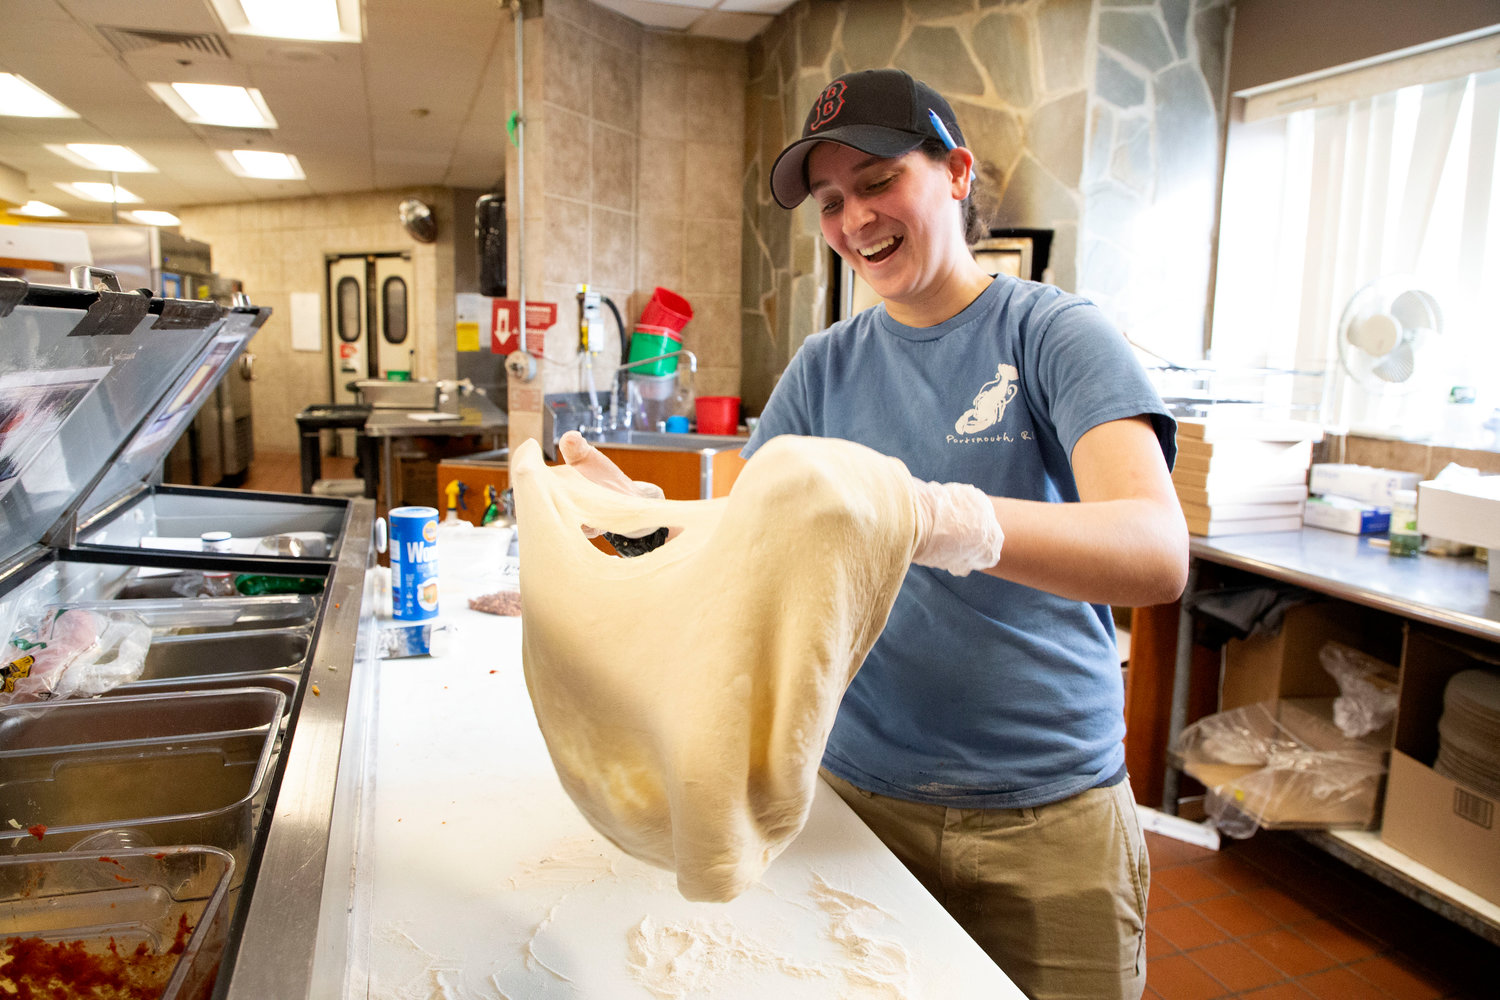 Danielle Chretien makes pizzas in the kitchen area at Clements’ Marketplace on Tuesday. “Growing our team is a top priority in 2023,” said Matt Ponte, spokesperson for the store.